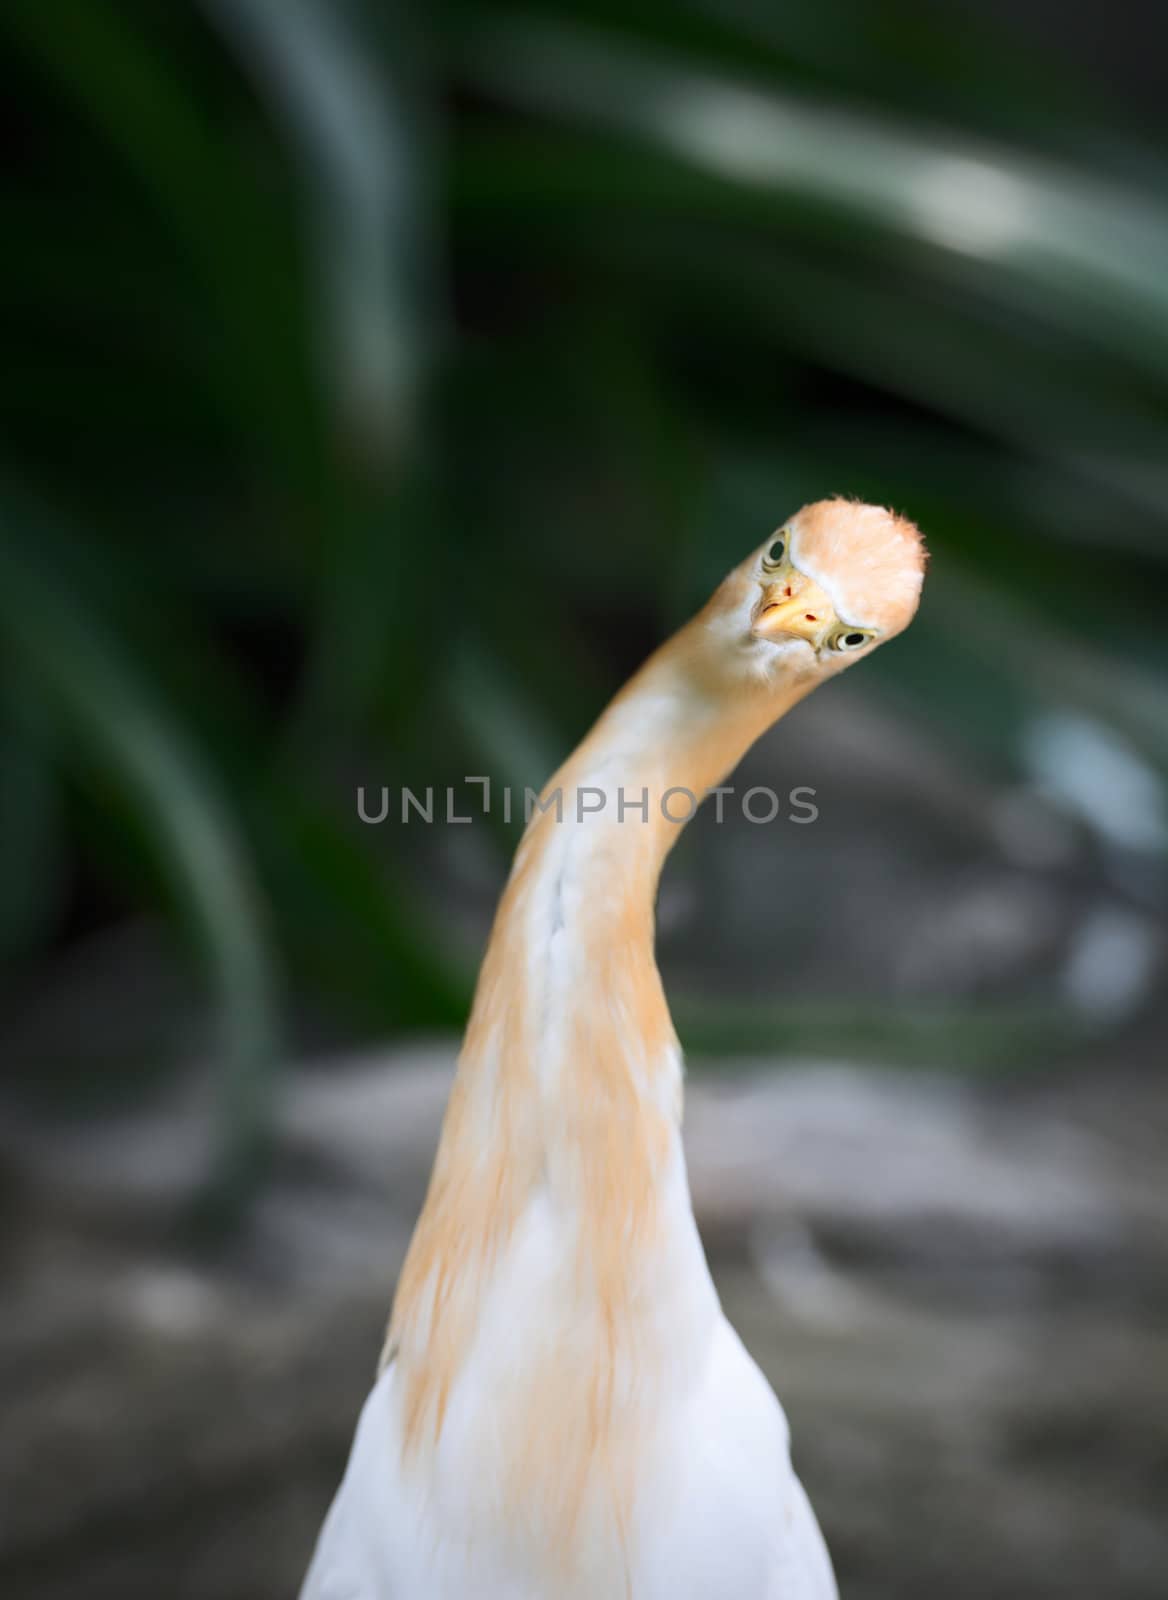 Curious funny front bird portrait. Cattle Egret (Bubulcus ibis) is a cosmopolitan species of heron (family Ardeidae).